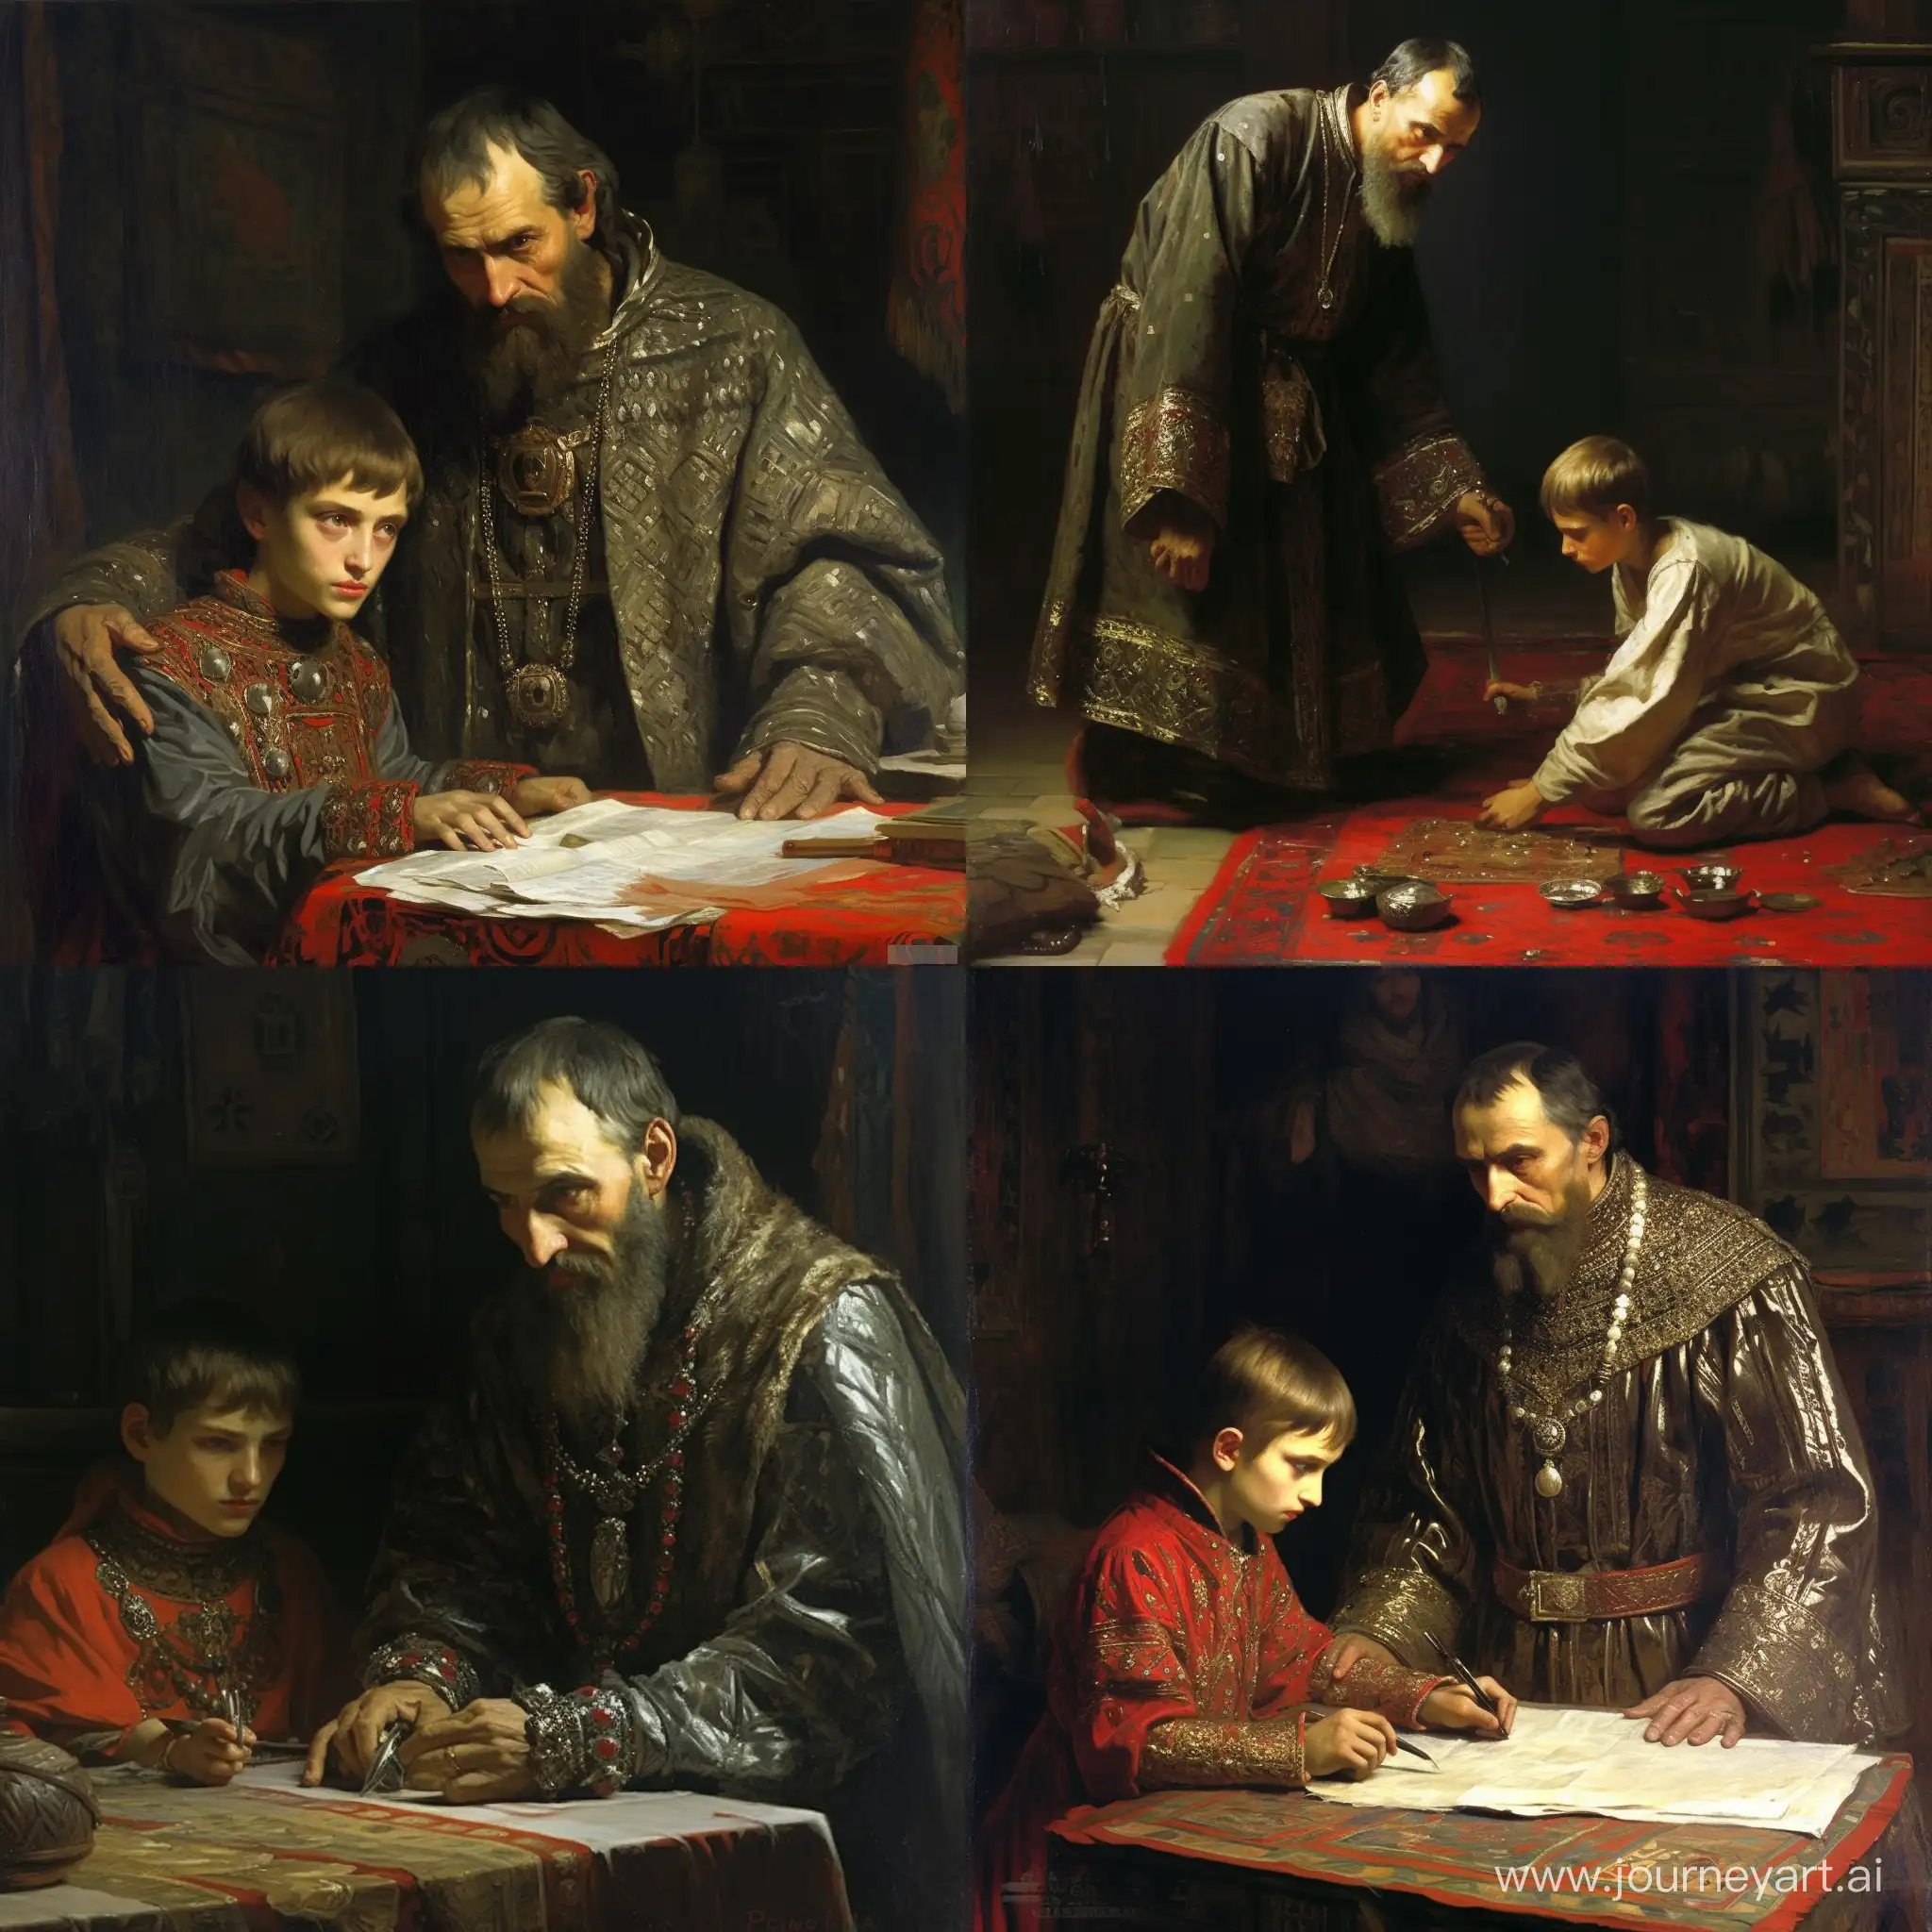 An exact copy of the painting “Ivan the Terrible and his son Ivan November 16, 1581” by I. Repin, where the tsar and his son are not present, but instead there are 2 robots depicted, one of which disassembles the other into small parts.